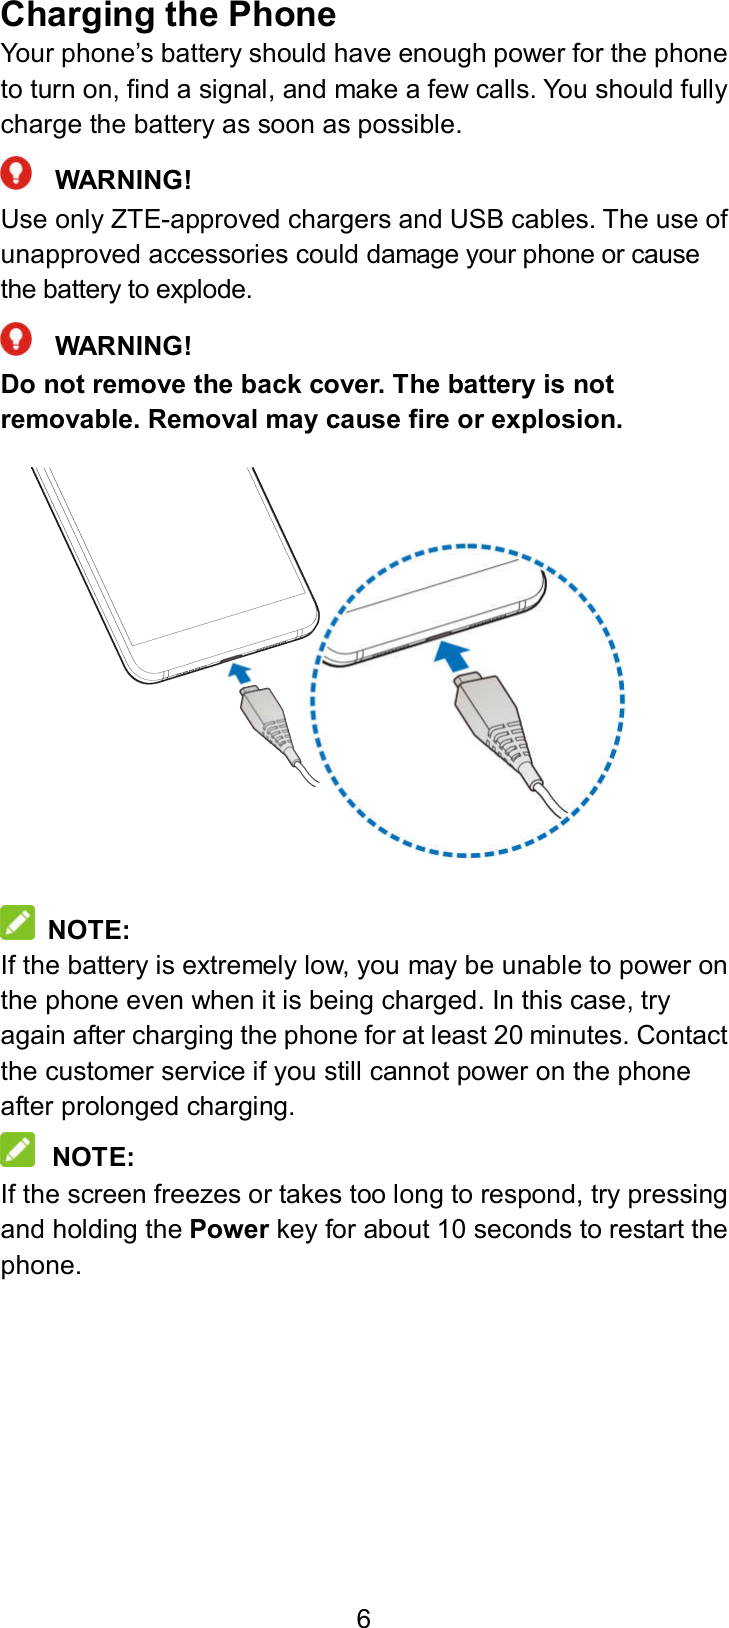  6 Charging the Phone Your phone’s battery should have enough power for the phone to turn on, find a signal, and make a few calls. You should fully charge the battery as soon as possible.  WARNING! Use only ZTE-approved chargers and USB cables. The use of unapproved accessories could damage your phone or cause the battery to explode.  WARNING! Do not remove the back cover. The battery is not removable. Removal may cause fire or explosion.                NOTE: If the battery is extremely low, you may be unable to power on the phone even when it is being charged. In this case, try again after charging the phone for at least 20 minutes. Contact the customer service if you still cannot power on the phone after prolonged charging.  NOTE: If the screen freezes or takes too long to respond, try pressing and holding the Power key for about 10 seconds to restart the phone. 